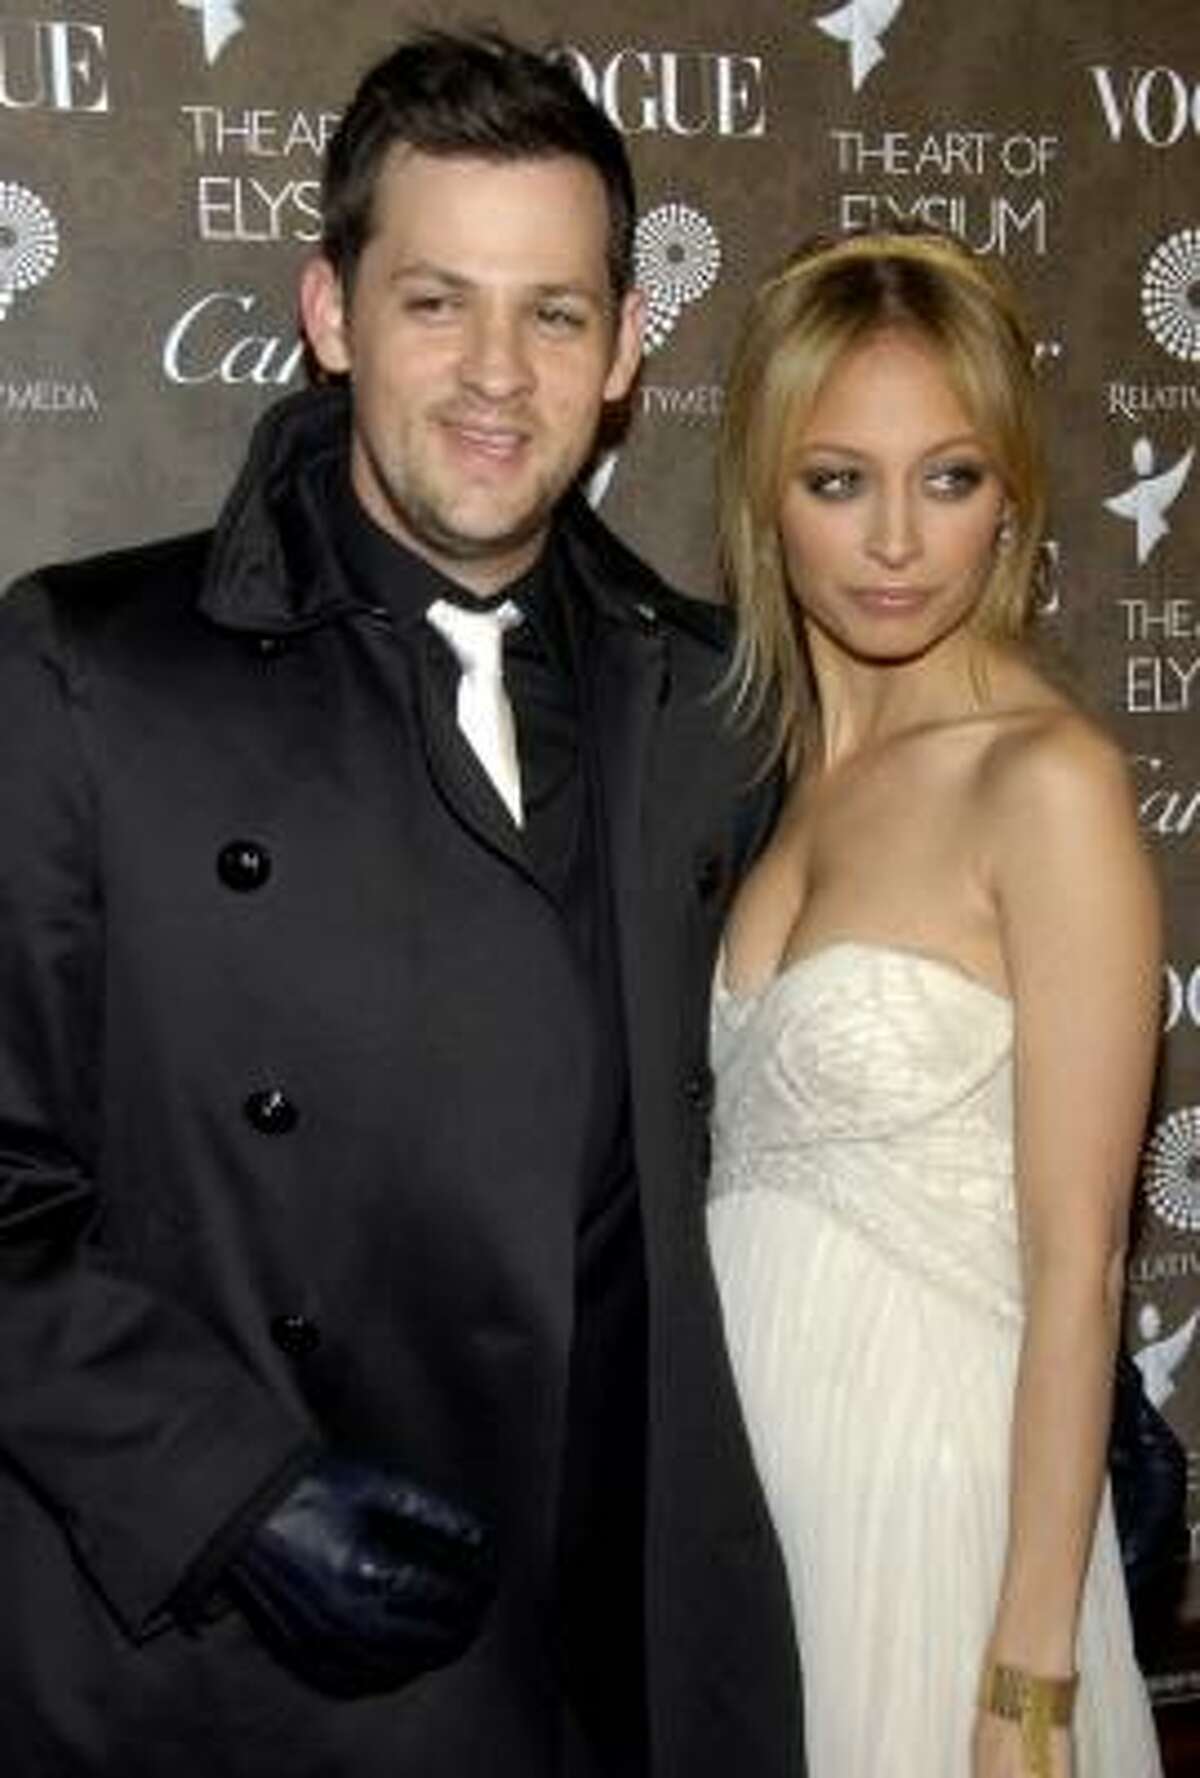 Nicole Richie and Joel Madden gave their daughter Harlow Winter Kate a baby brother they named Sparrow James Midnight Madden.